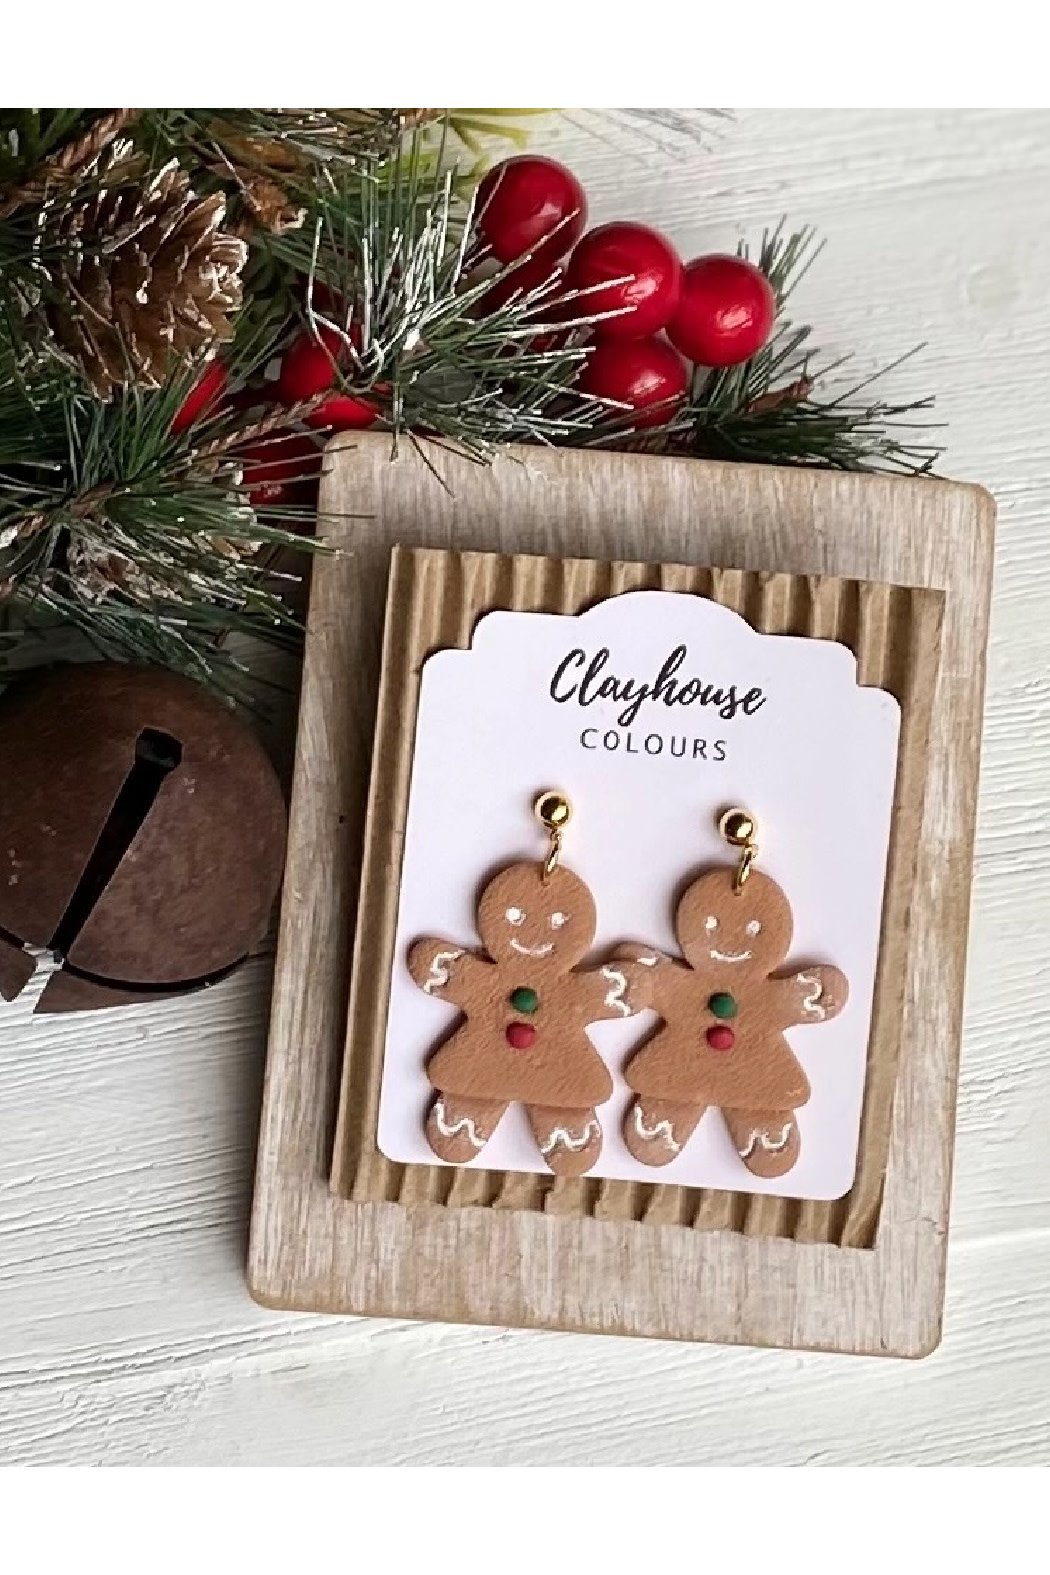 Clayhouse Colours Gingerbread Clay Earrings